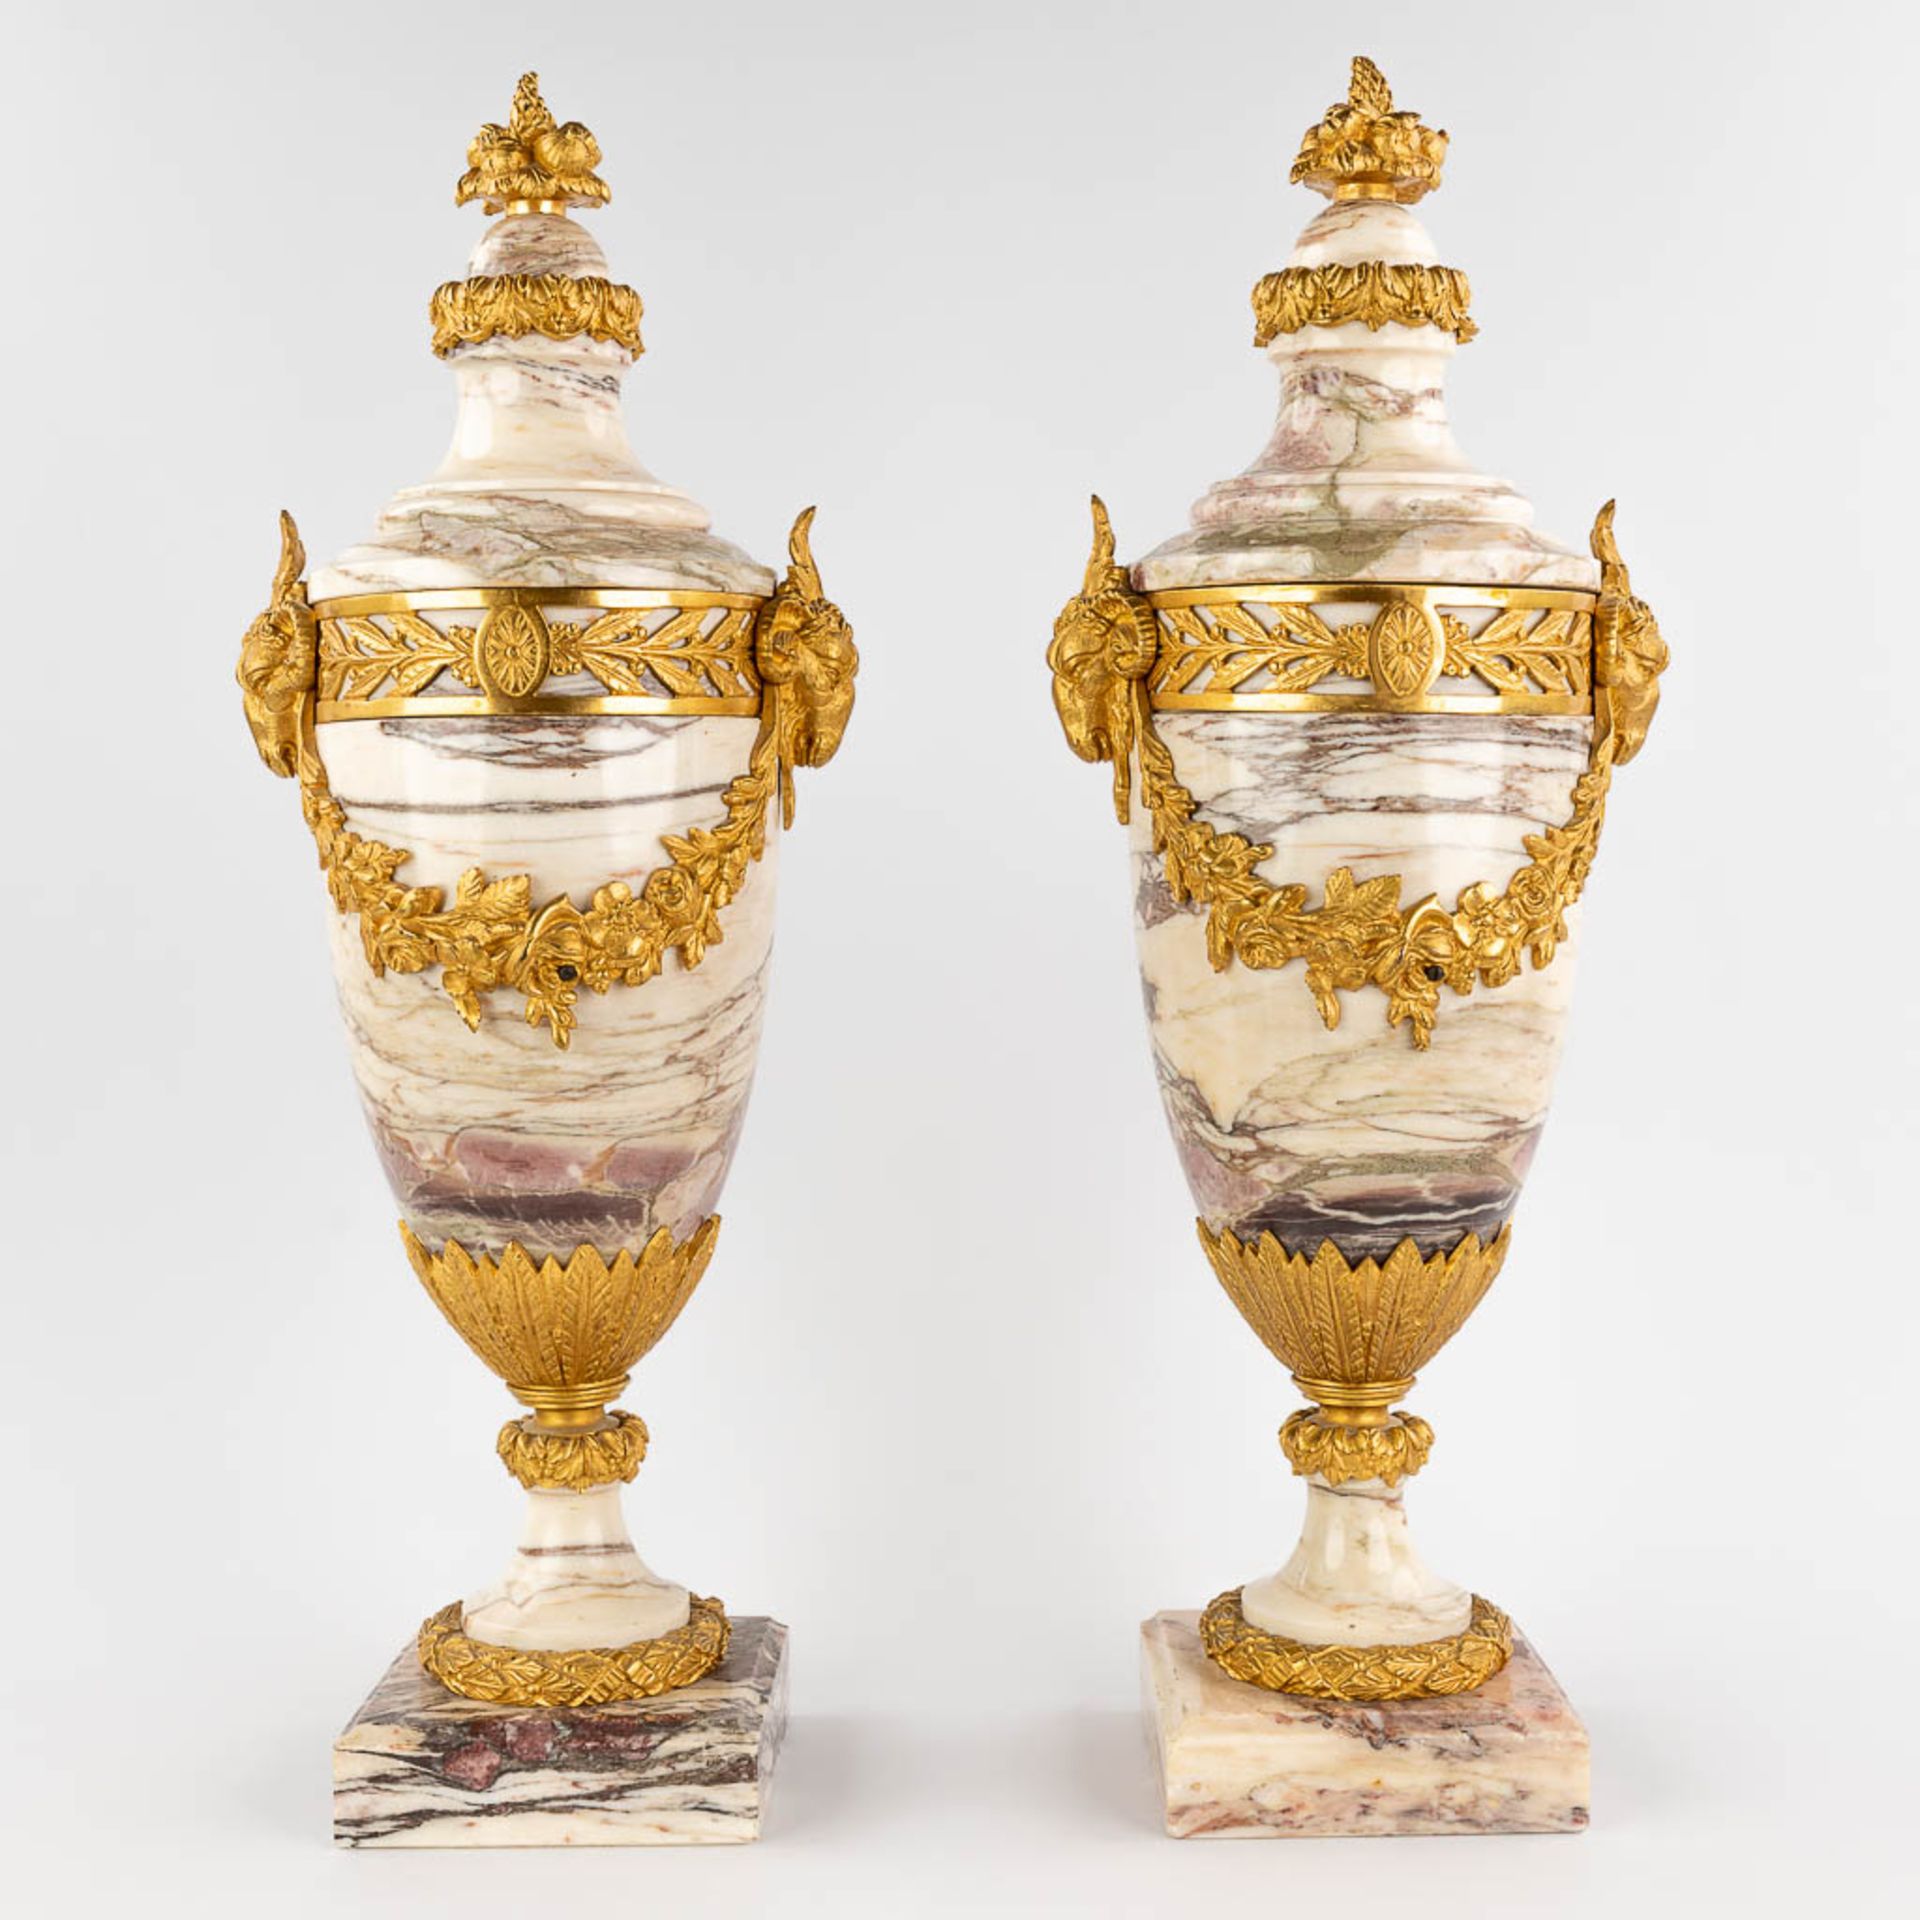 A pair of gilt bronze mounted cassolettes, ram's heads in Louis XVI style. (W: 20 x H: 56 cm)